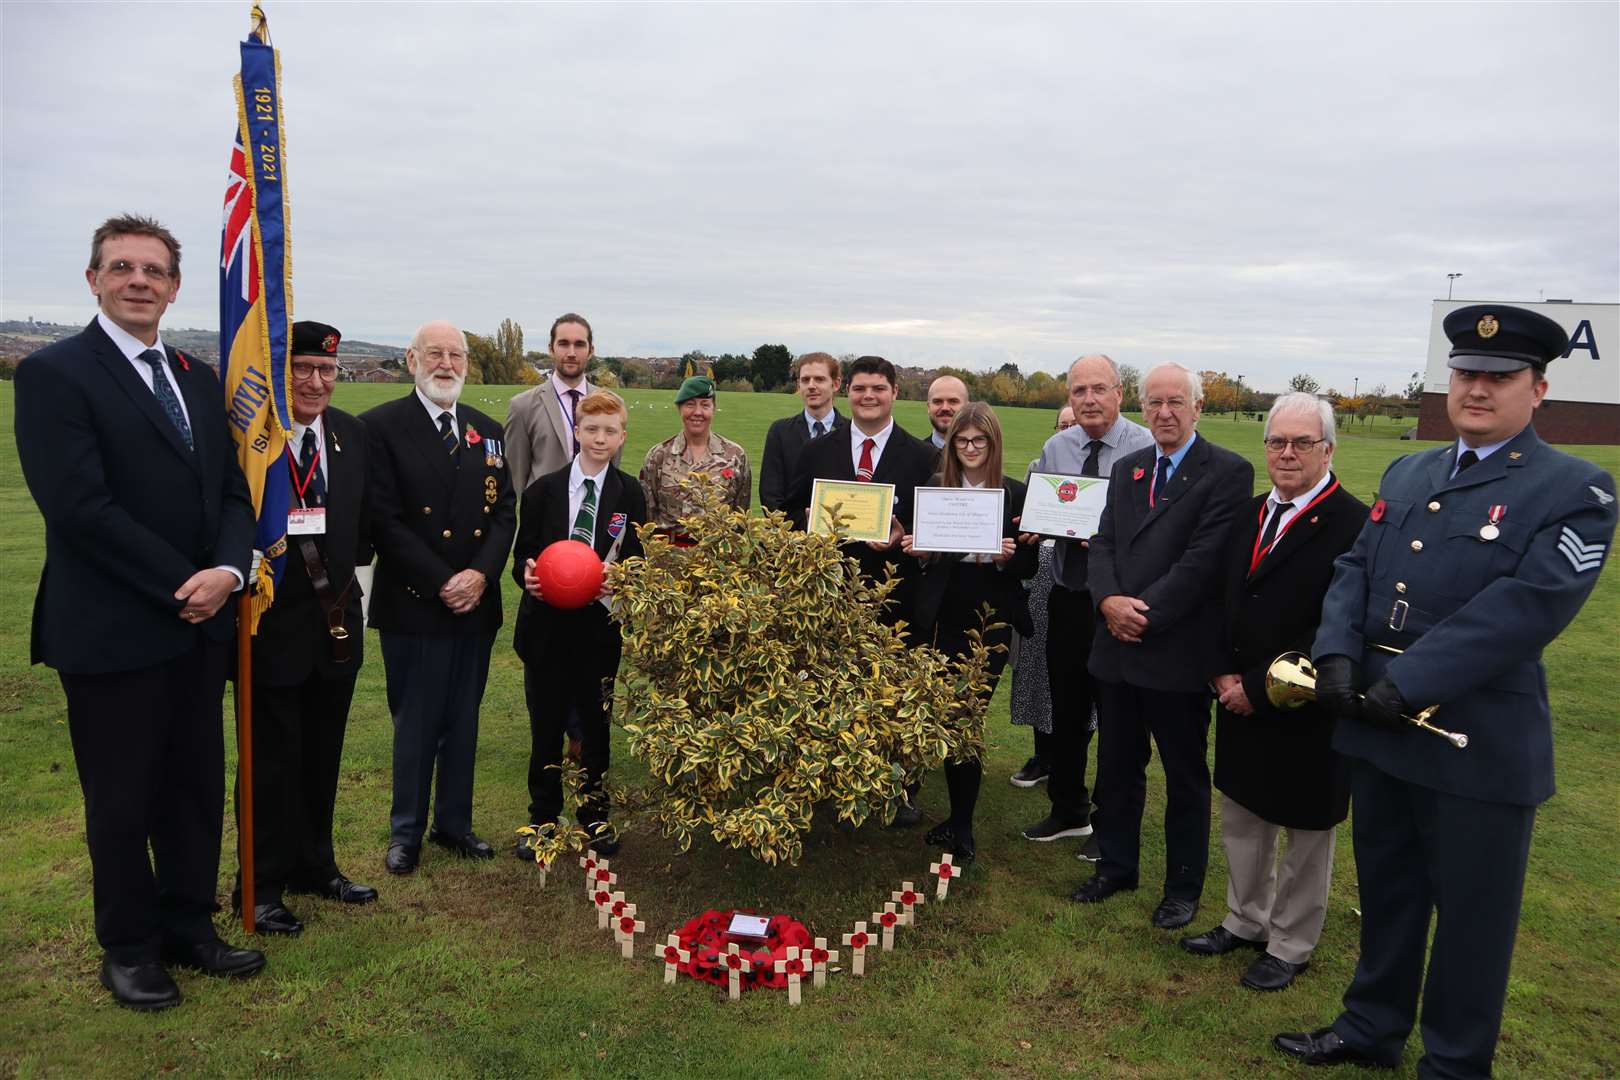 Wreath-laying ceremony at the Oasis Academy Isle of Sheppey peace tree on the Minster campus